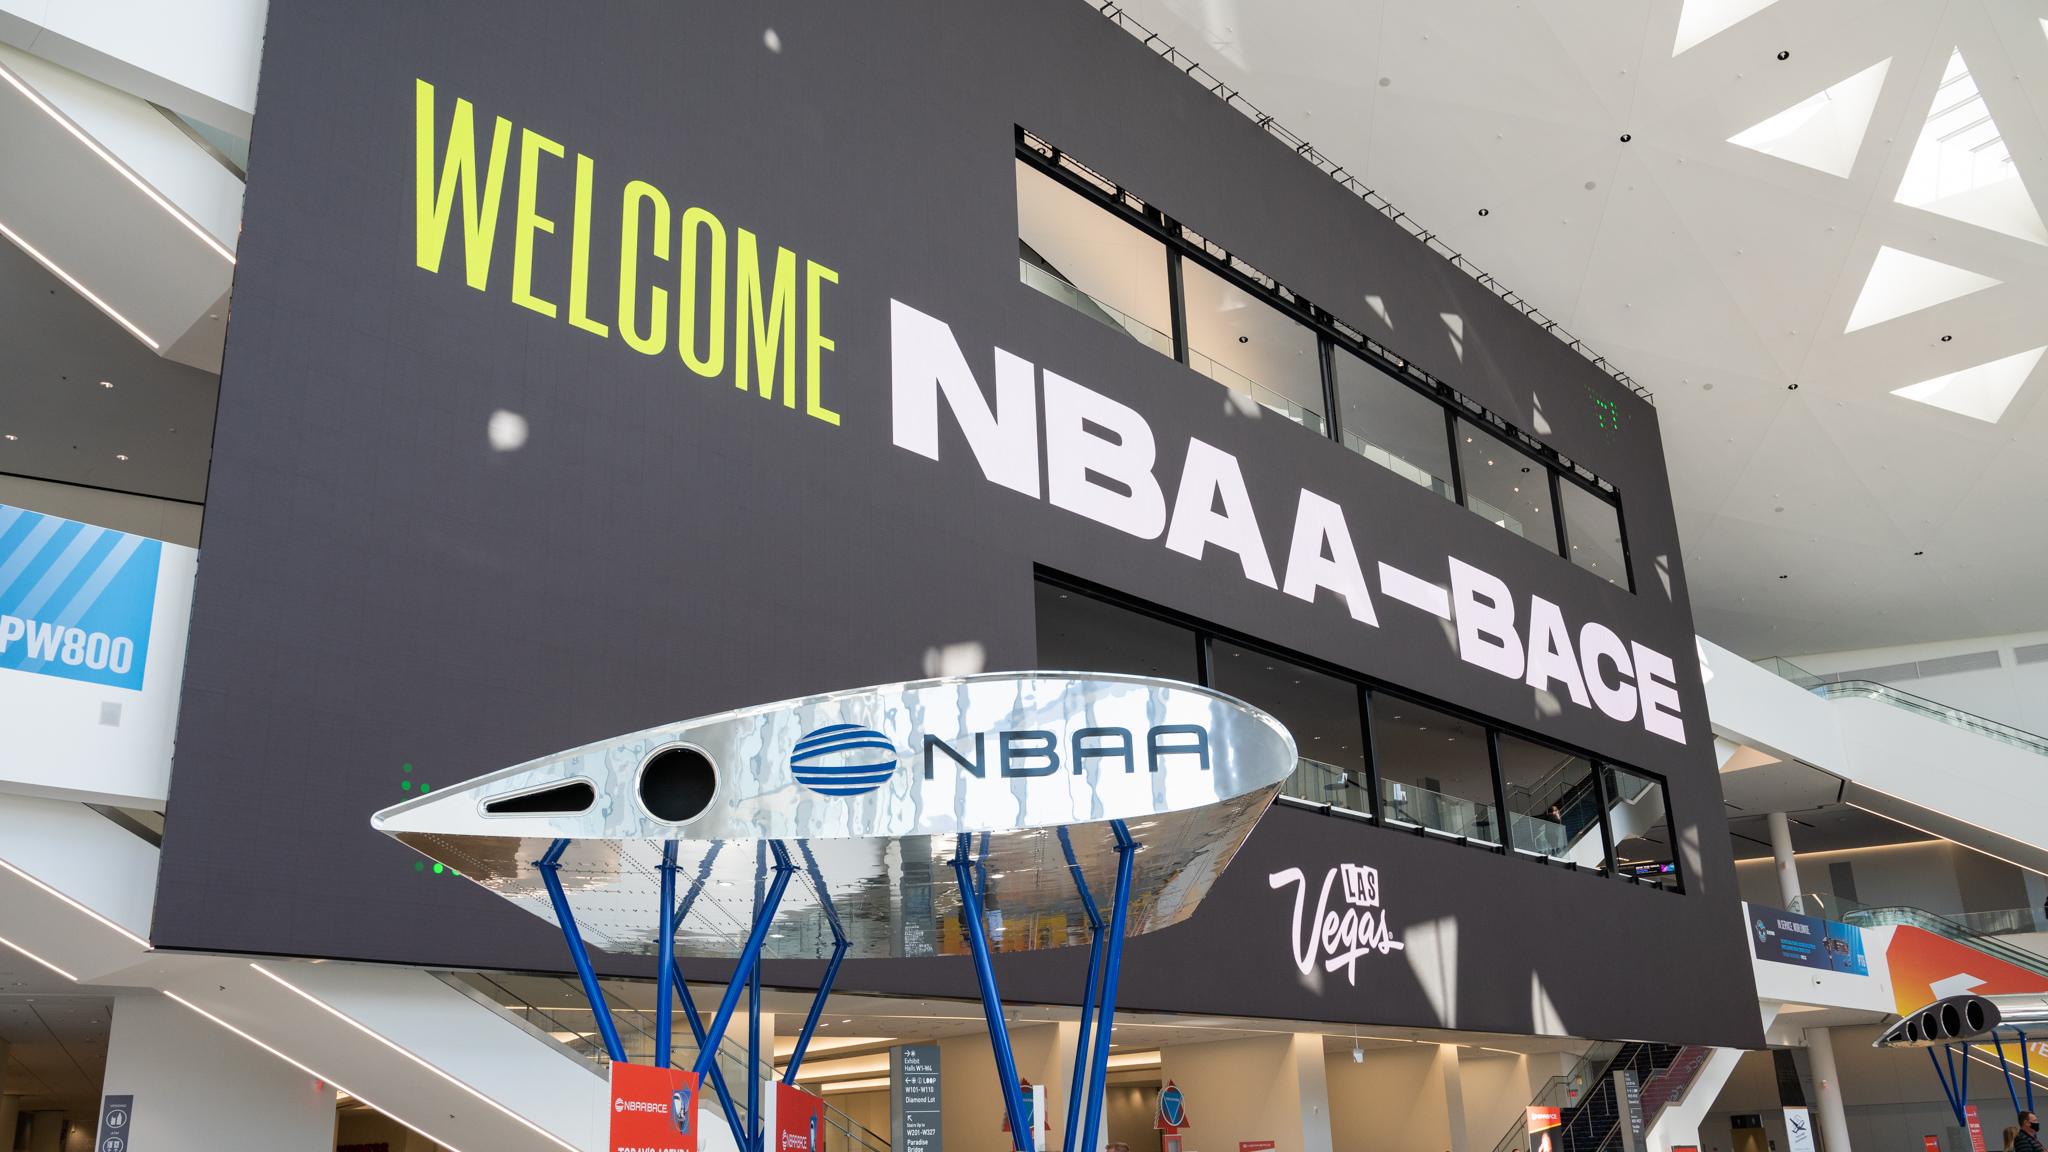 Gallery Business Aviation Returns To Las Vegas For NBAABACE